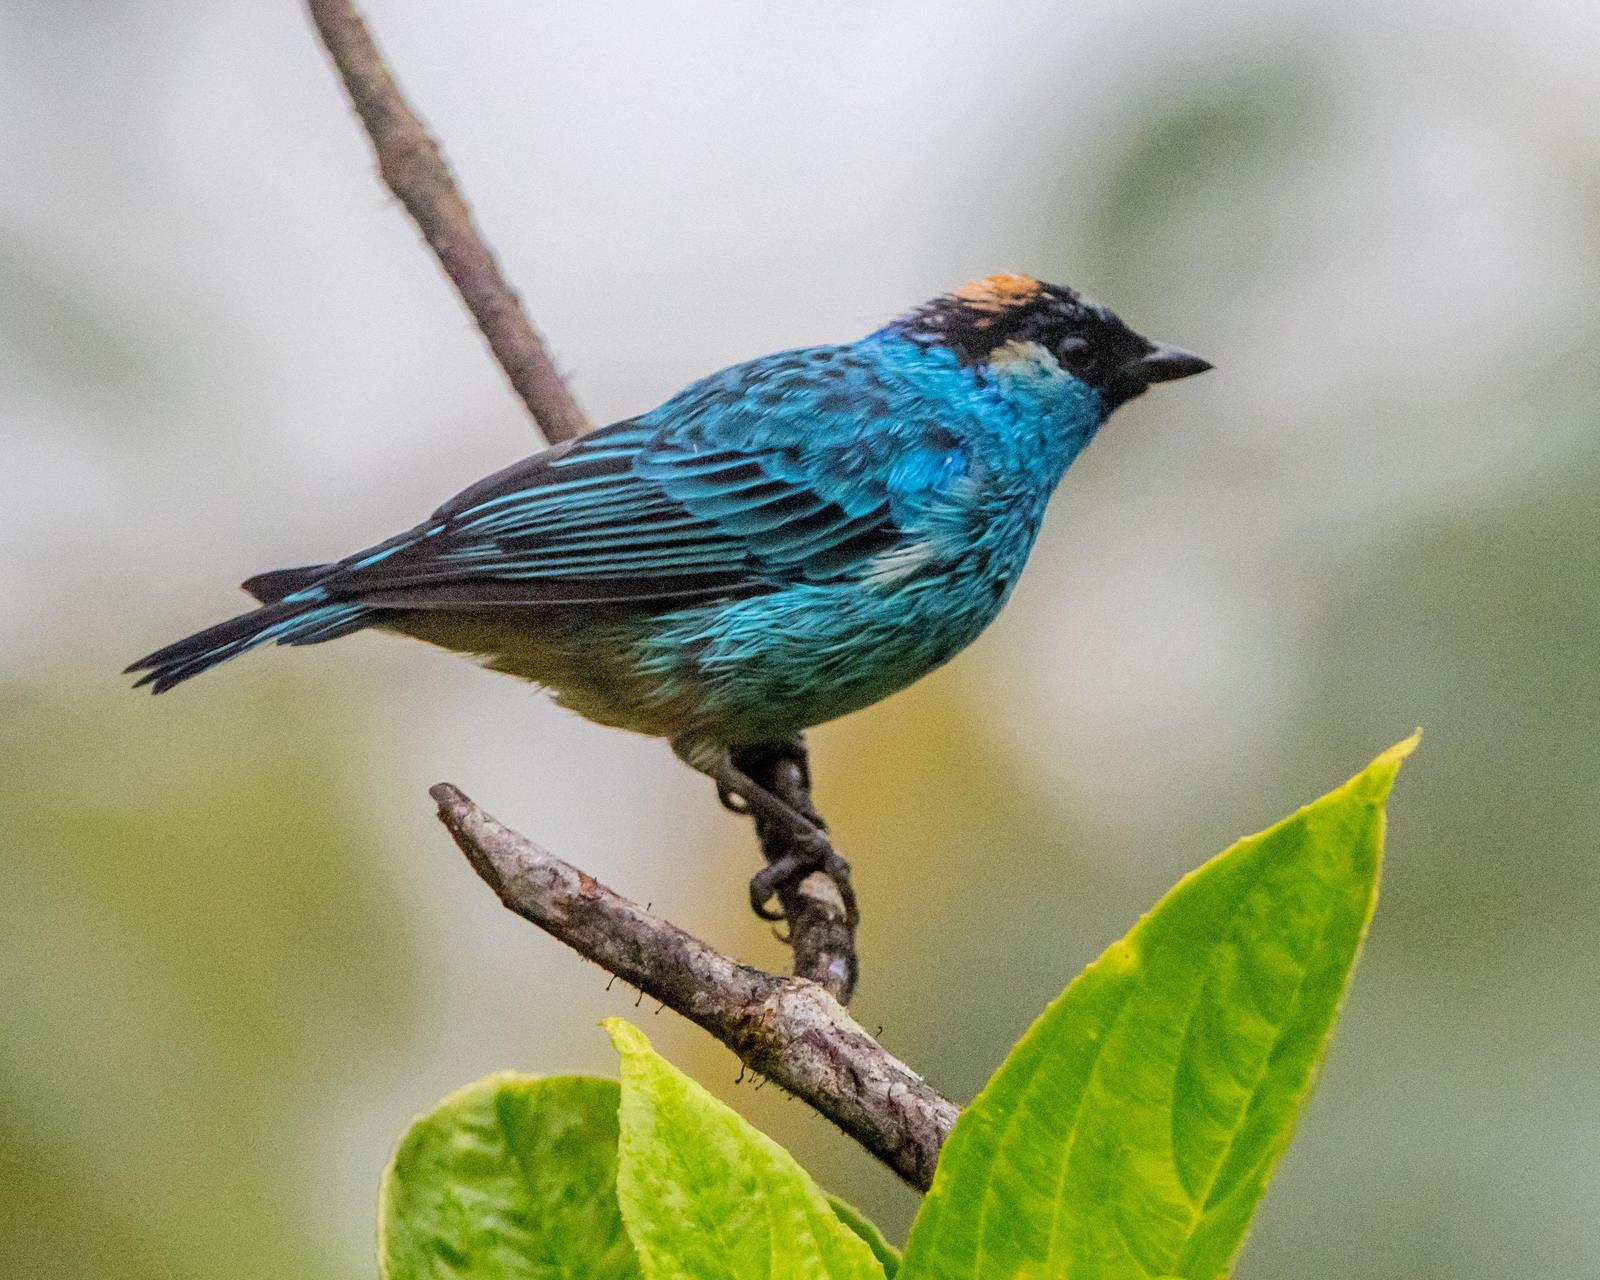 Golden-naped Tanager Photo by Harold Davis